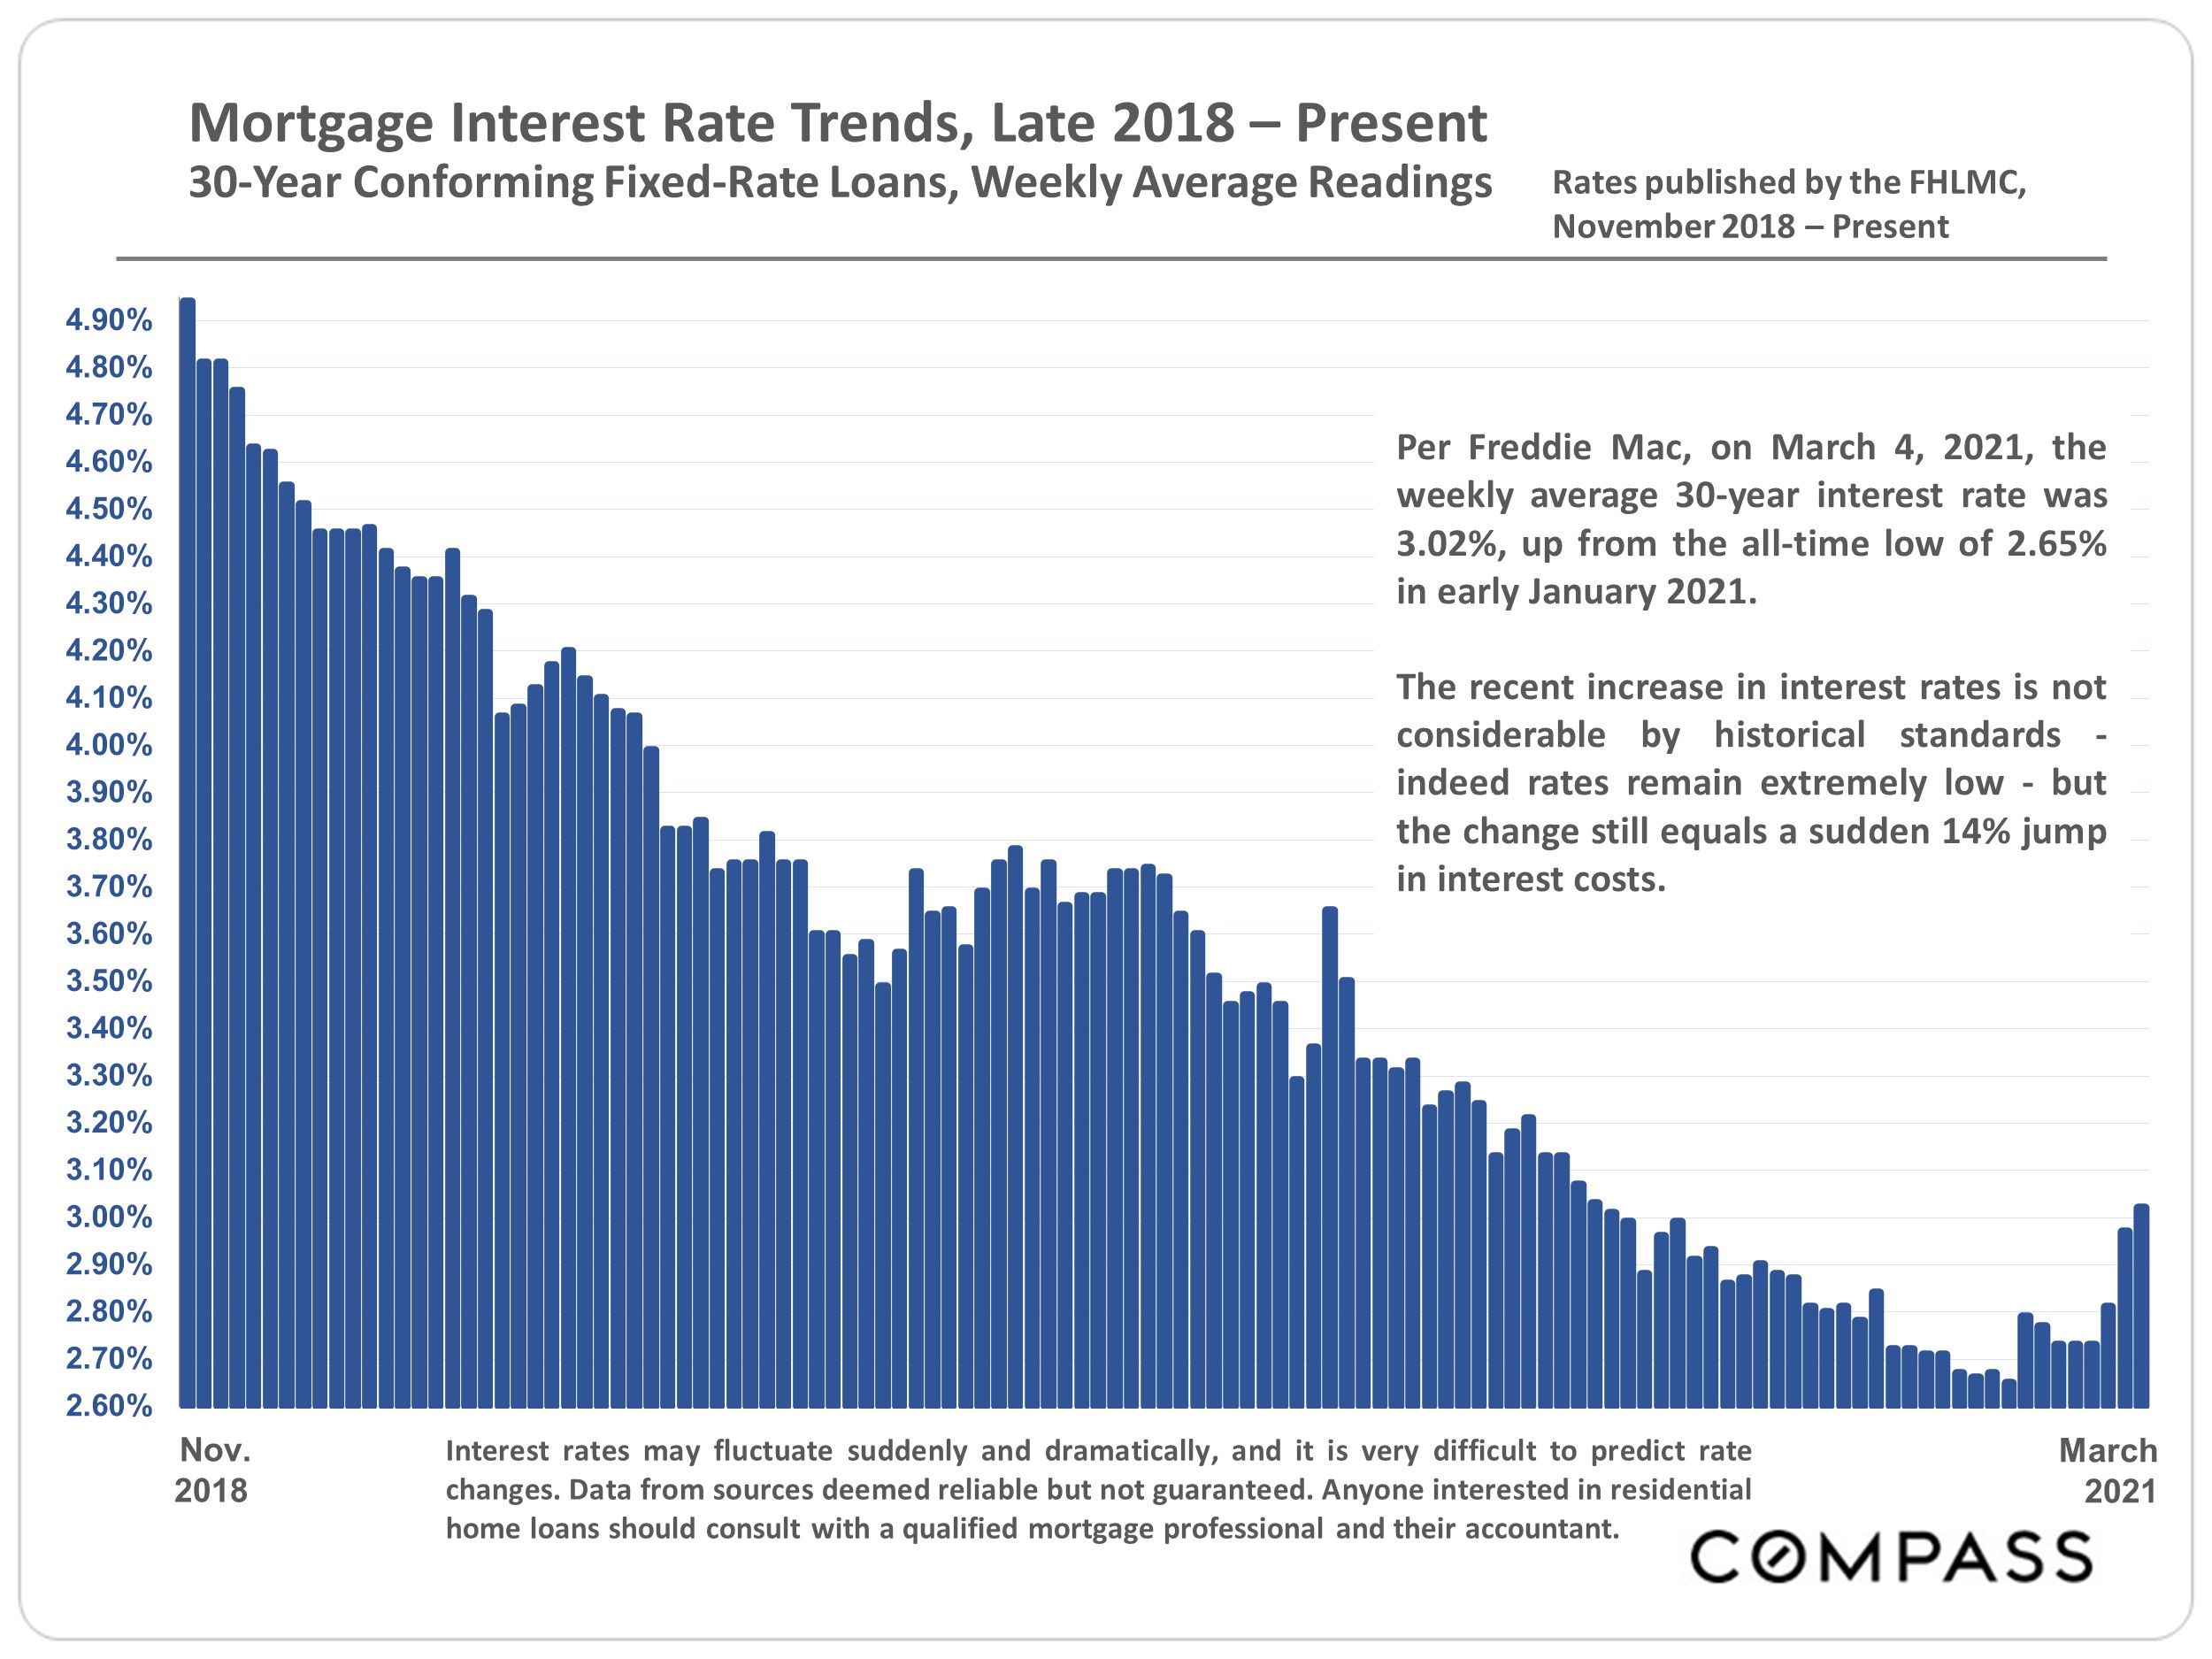 Mortgage Interest Rate Trends, Late 2018 - Present